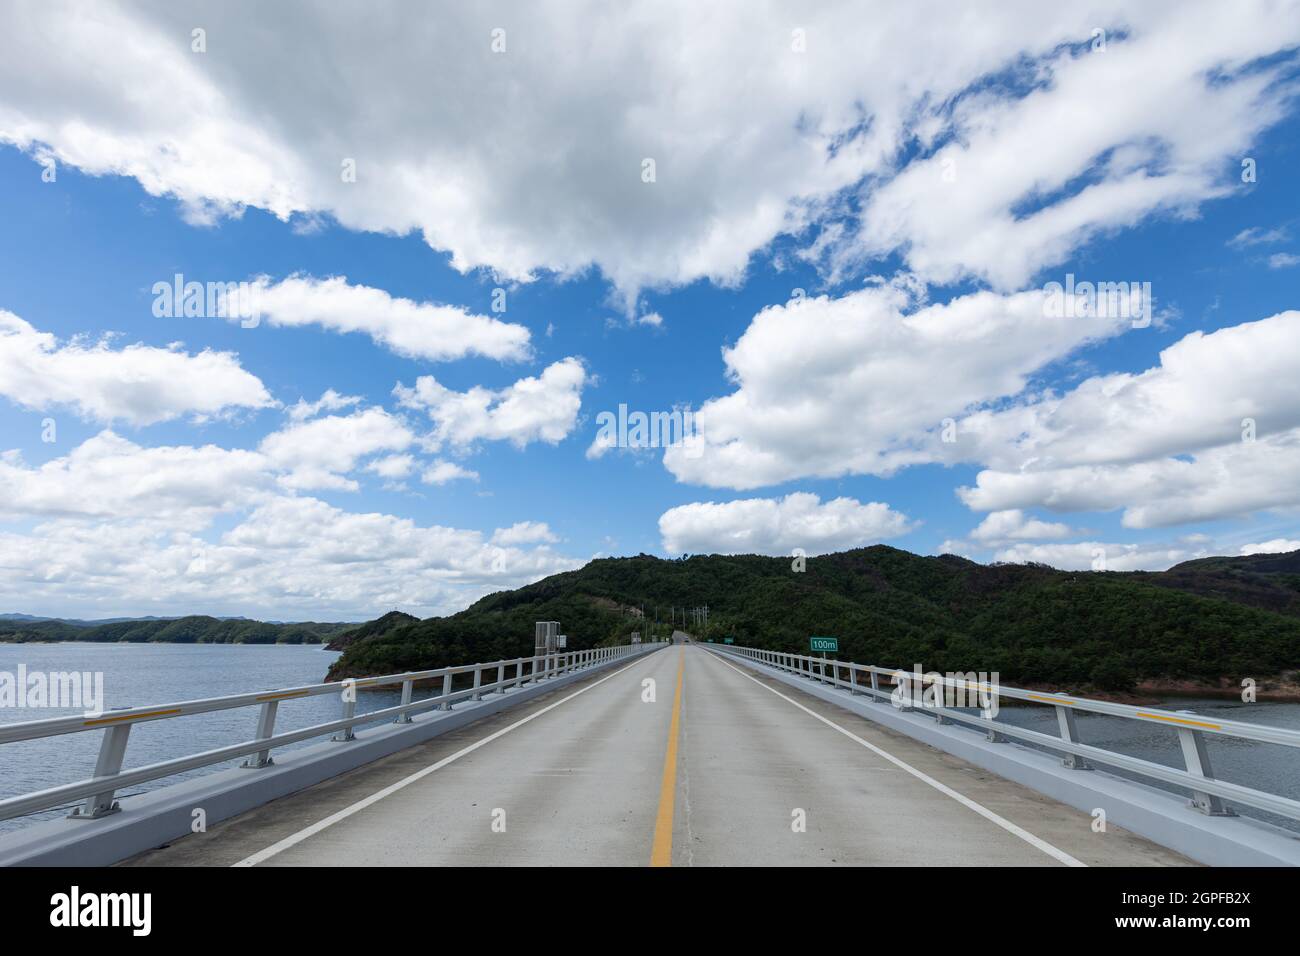 landscape of beautiful blue sky over bridge with white clouds, Imdong dam reservoir, Korea Stock Photo